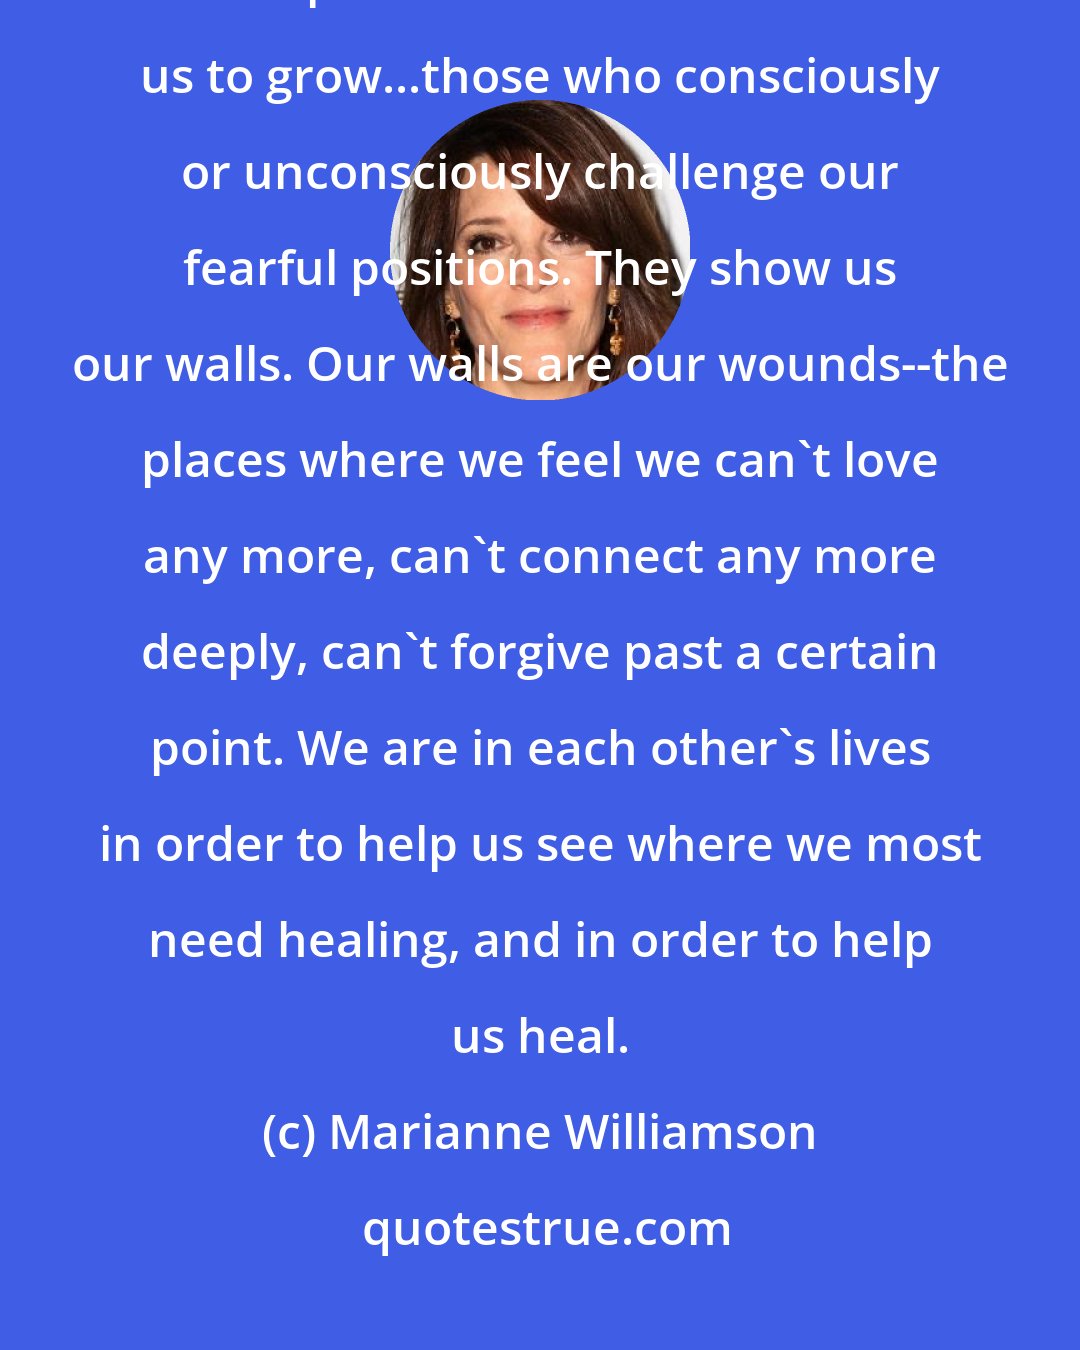 Marianne Williamson: Someone with whom we have a lifetime's worth of lessons to learn is someone whose presence in our lives forces us to grow...those who consciously or unconsciously challenge our fearful positions. They show us our walls. Our walls are our wounds--the places where we feel we can't love any more, can't connect any more deeply, can't forgive past a certain point. We are in each other's lives in order to help us see where we most need healing, and in order to help us heal.